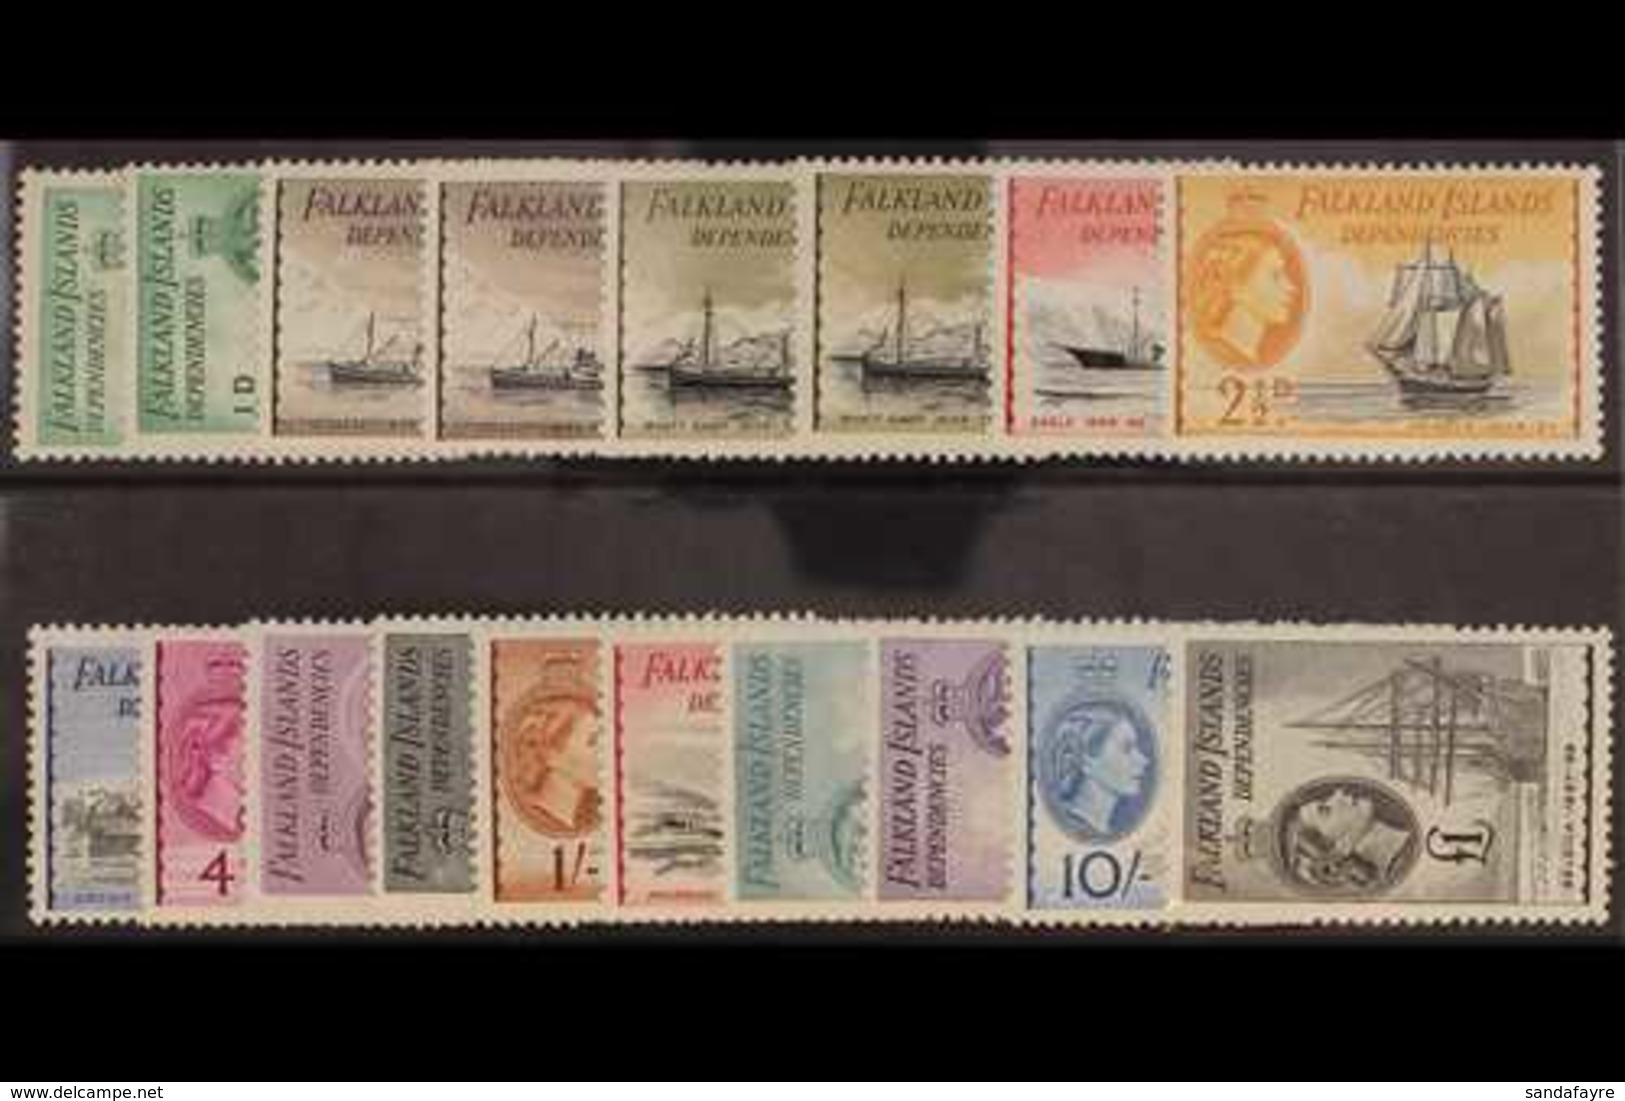 1954 Complete Set Including The DLR Printings,SG G26/40, G26a, 27b, 28a, Very Lighly Hinged Mint. (18 Stamps) For More I - Falklandinseln